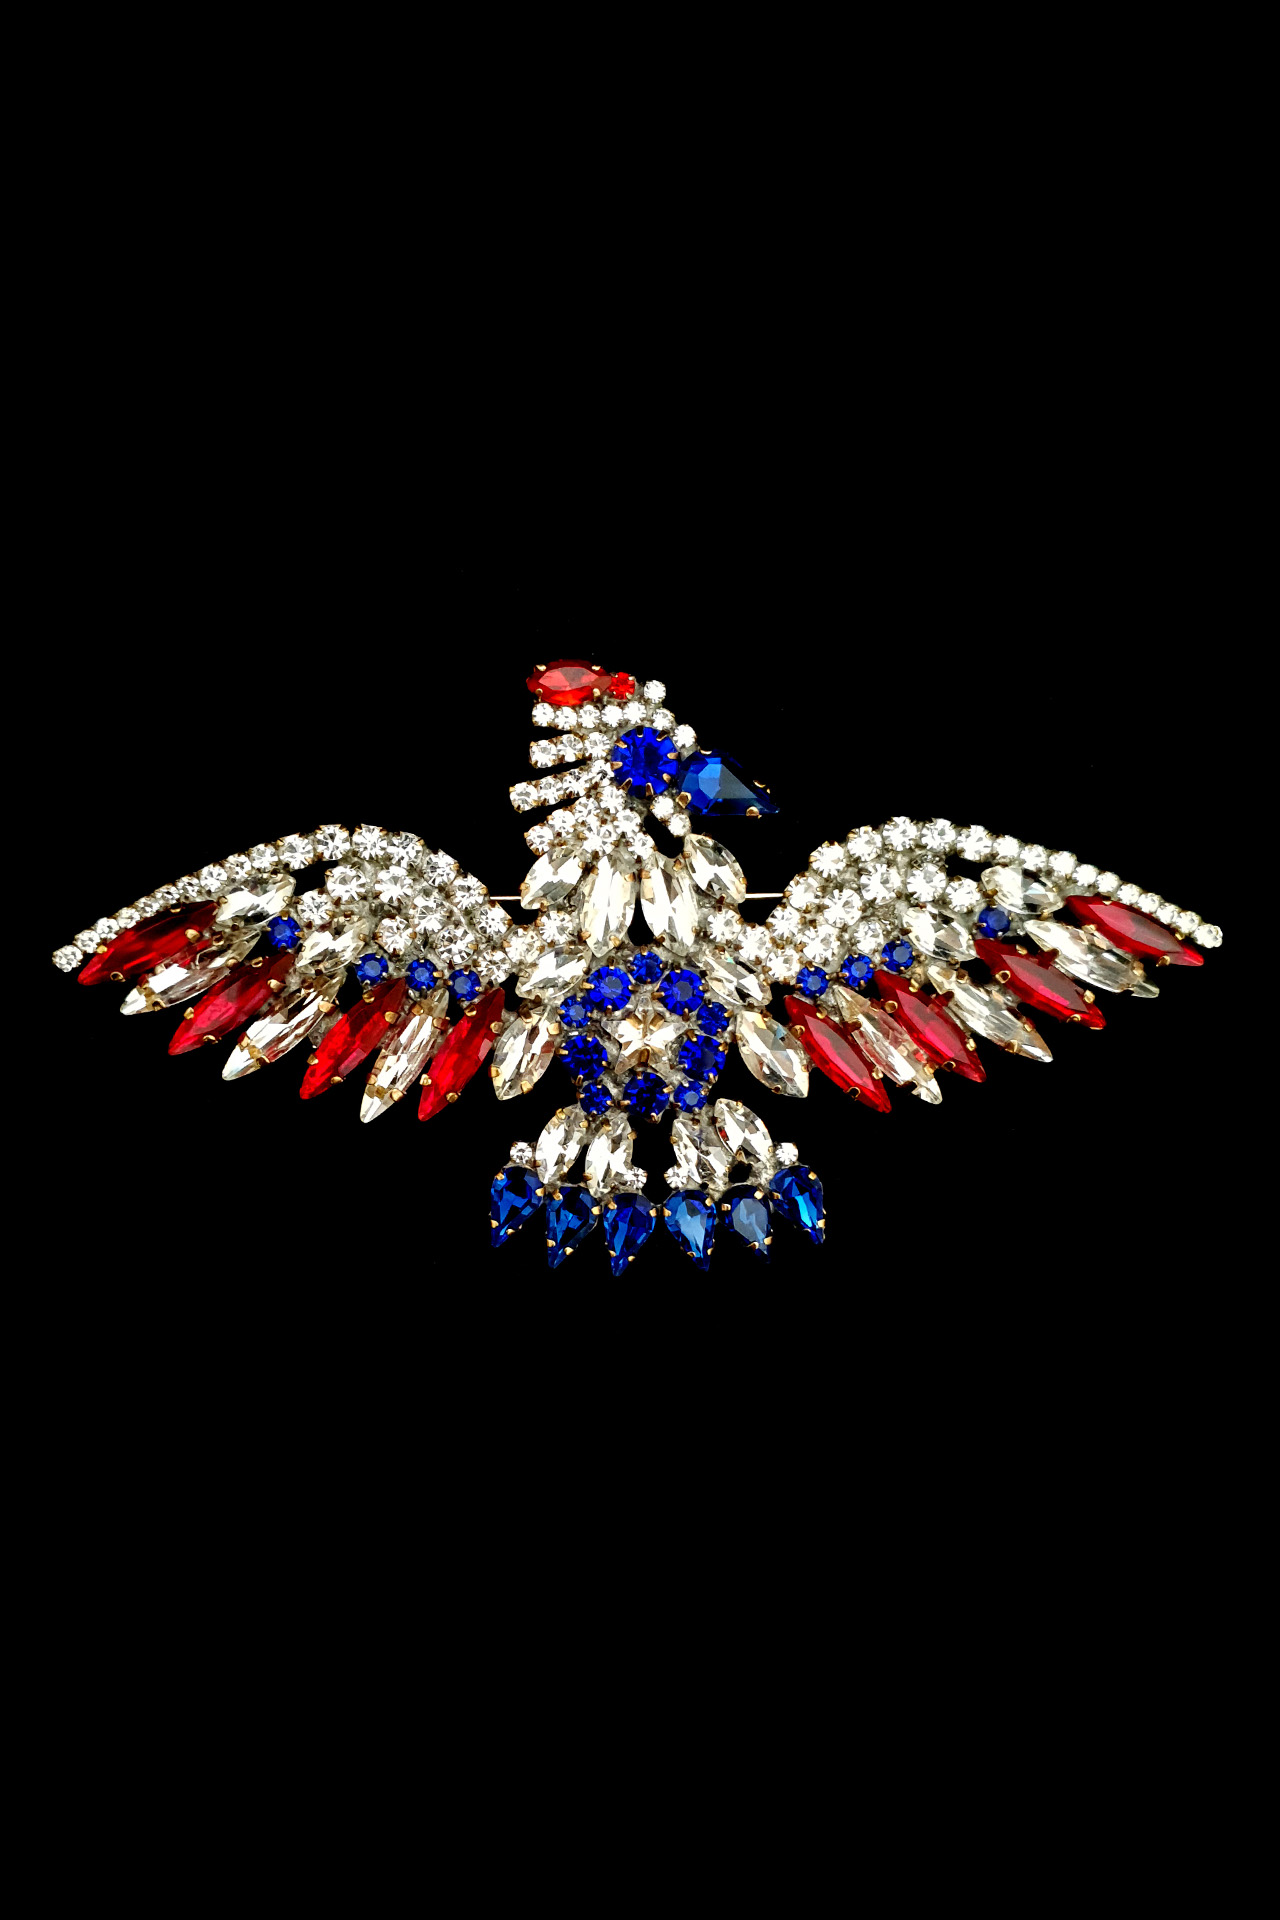 Handcrafted decorative brooch with US eagle